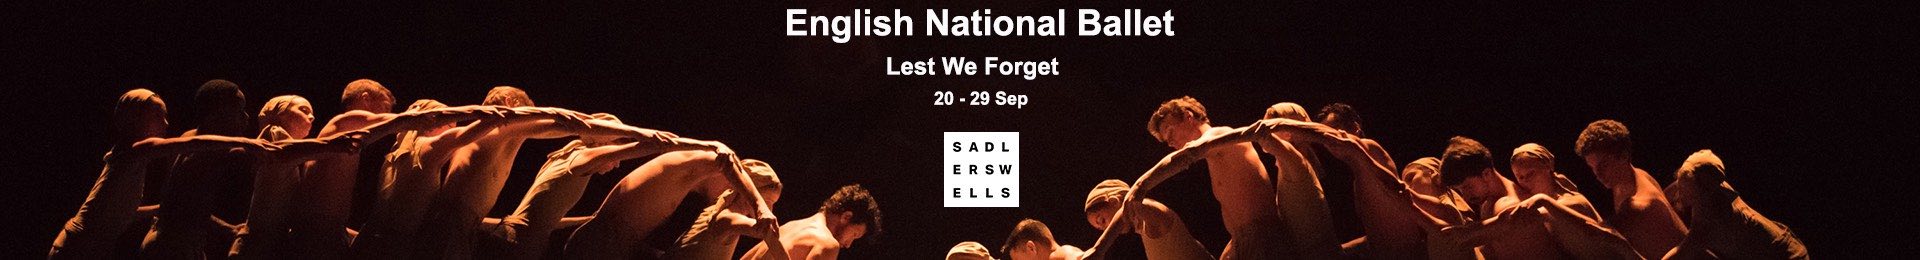 English National Ballet: Lest We Forget Tickets London